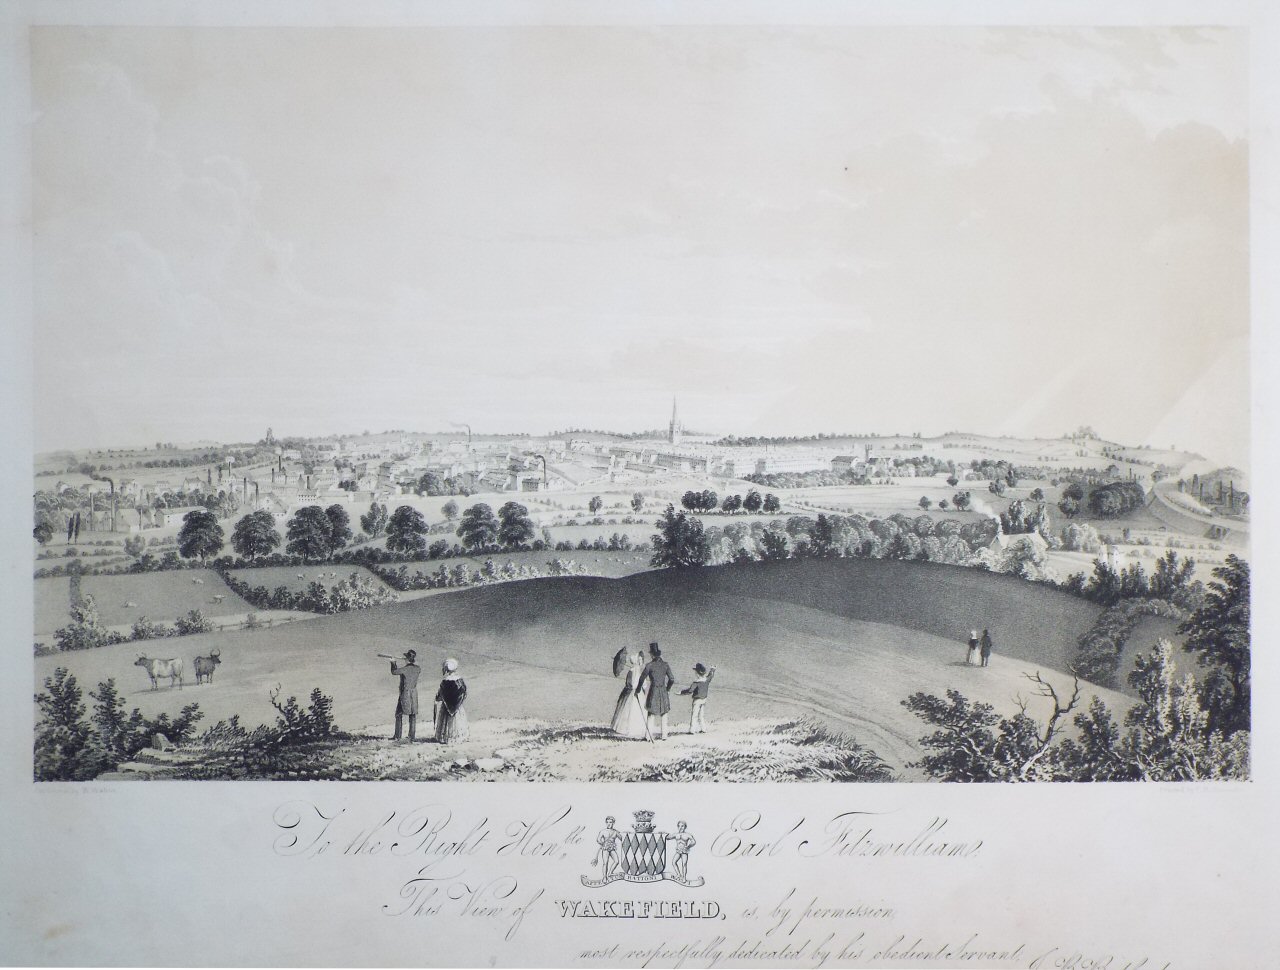 Lithograph - To the Right Honble. Earl Fitzwilliam, This View of Wakefield, is by permission most respectfully dedicated by his obedient Servant ... Bedford.